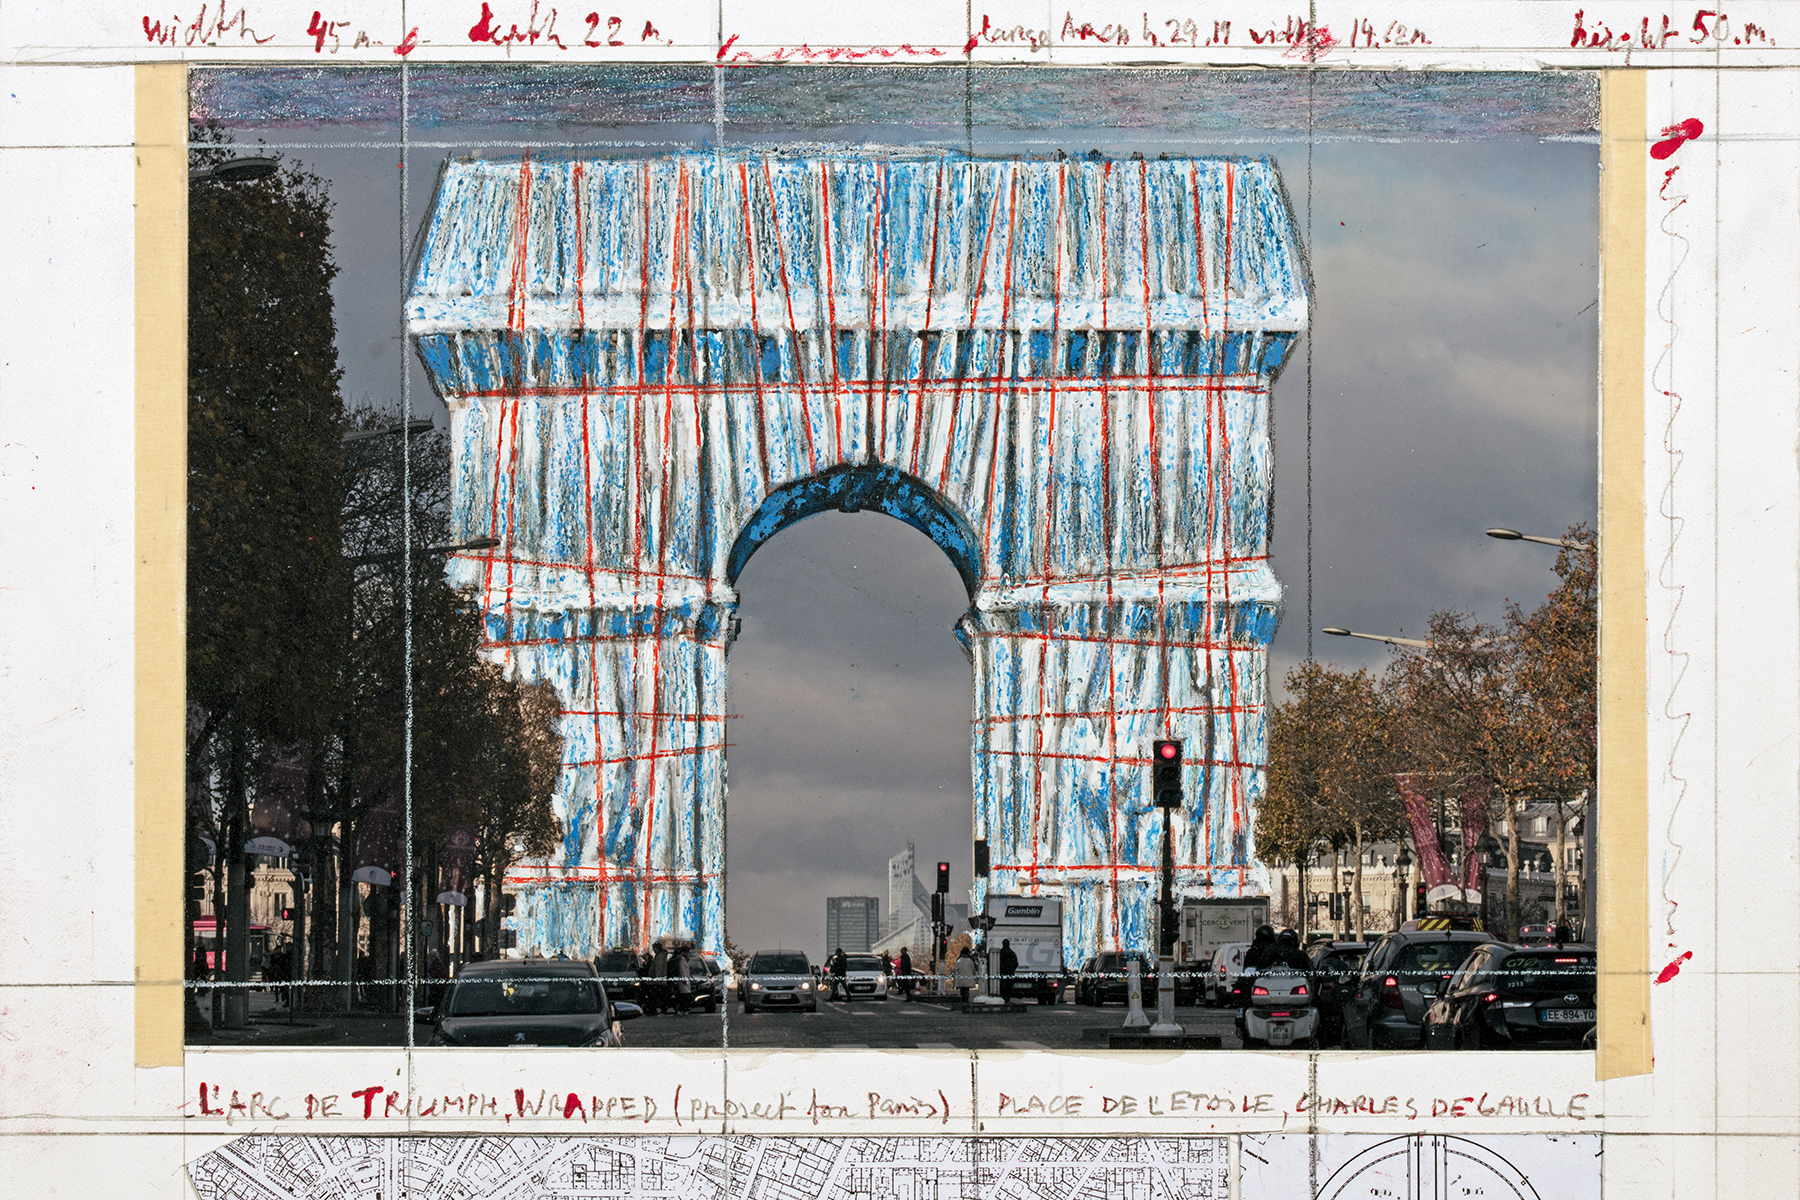 This fall, the Arc de Triomphe in Paris will receive temporary makeup